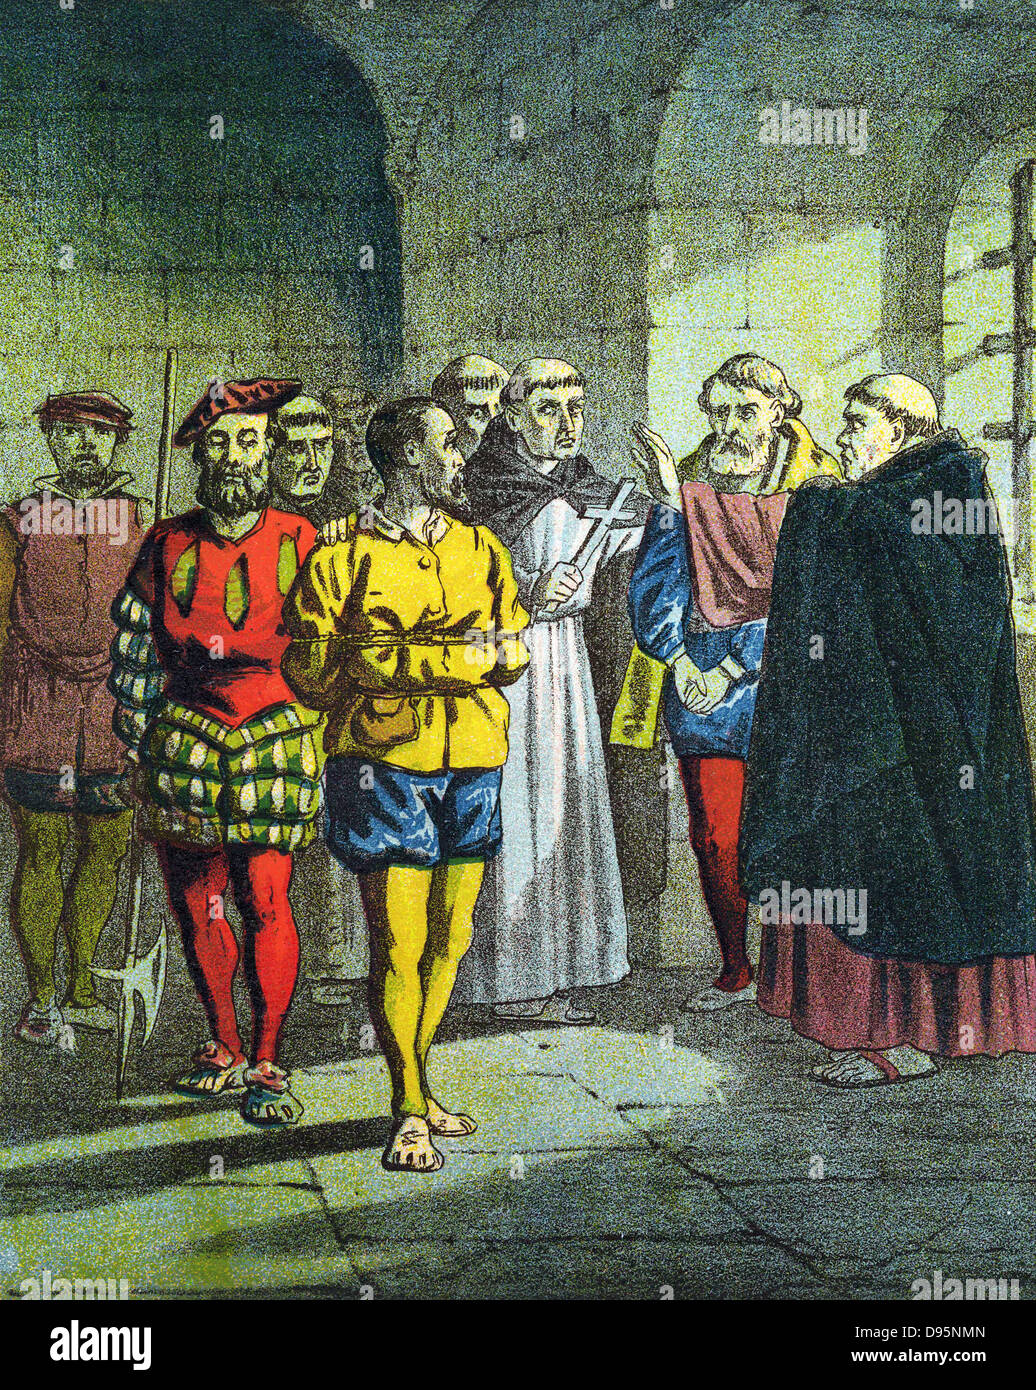 Baudicon Ogden & George Wishart (bc1513-1546), Scottish Protestant reformer, having been tried before Cardinal Beaton Bethune or Beautoun) and condemned to death, being urged to deny their faith and accept Rome.  Beaton assassinated in revenge for having the popular Wishart executed.  Chromolithograph from edition of 'Foxe's Book of Martyrs' c1860. Stock Photo